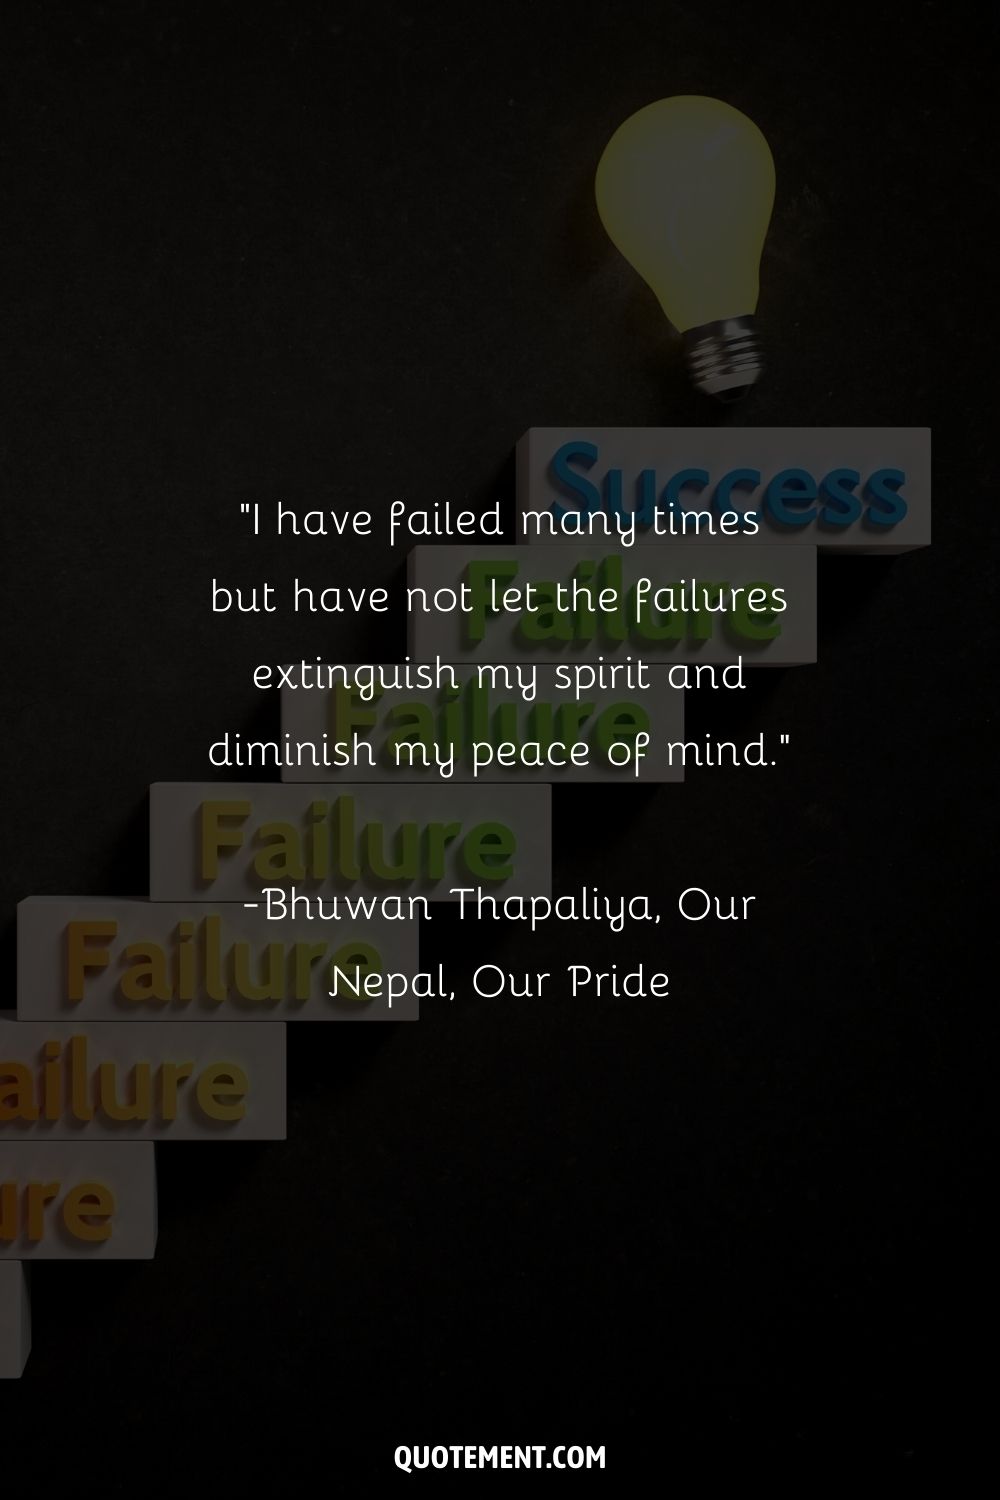 “I have failed many times but have not let the failures extinguish my spirit and diminish my peace of mind.” ― Bhuwan Thapaliya, Our Nepal, Our Pride